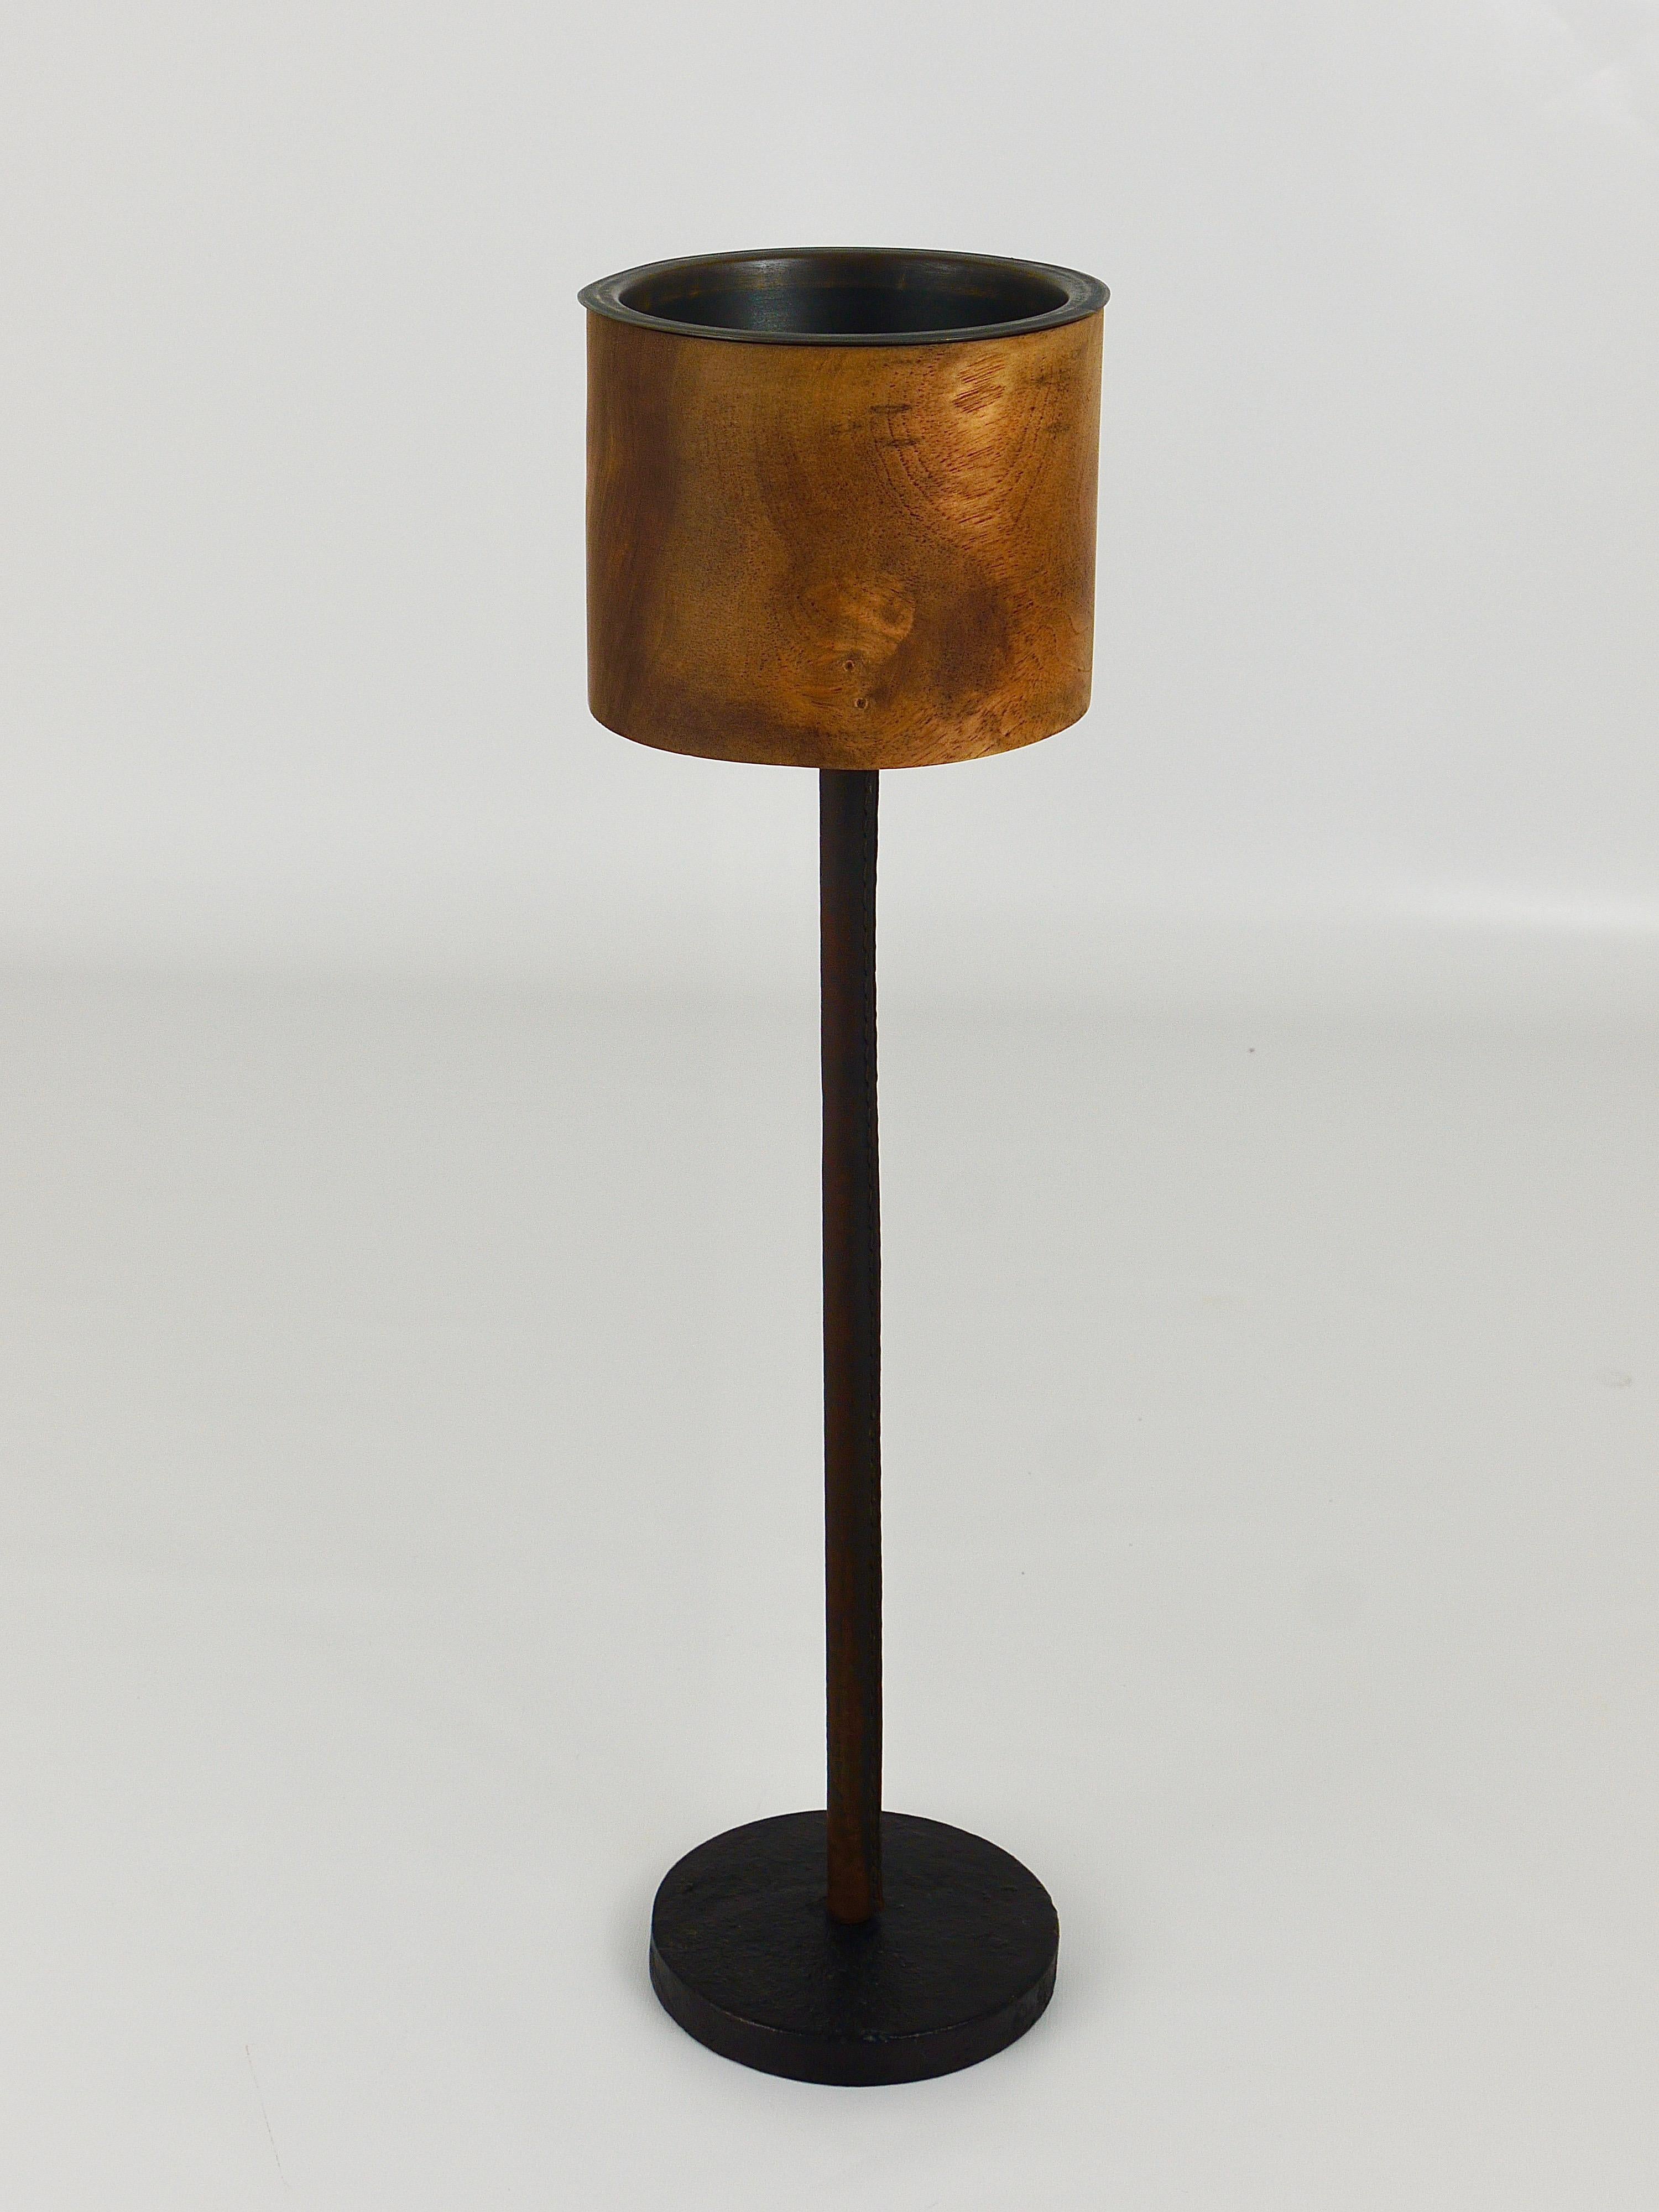 A rare midcentury candleholder from the 1950s by Carl Auböck. It is completely handmade and has a cylindrical top, made of walnut with a brass interior on leather covered stem and a black finished cast iron base. In good condition with signs of age